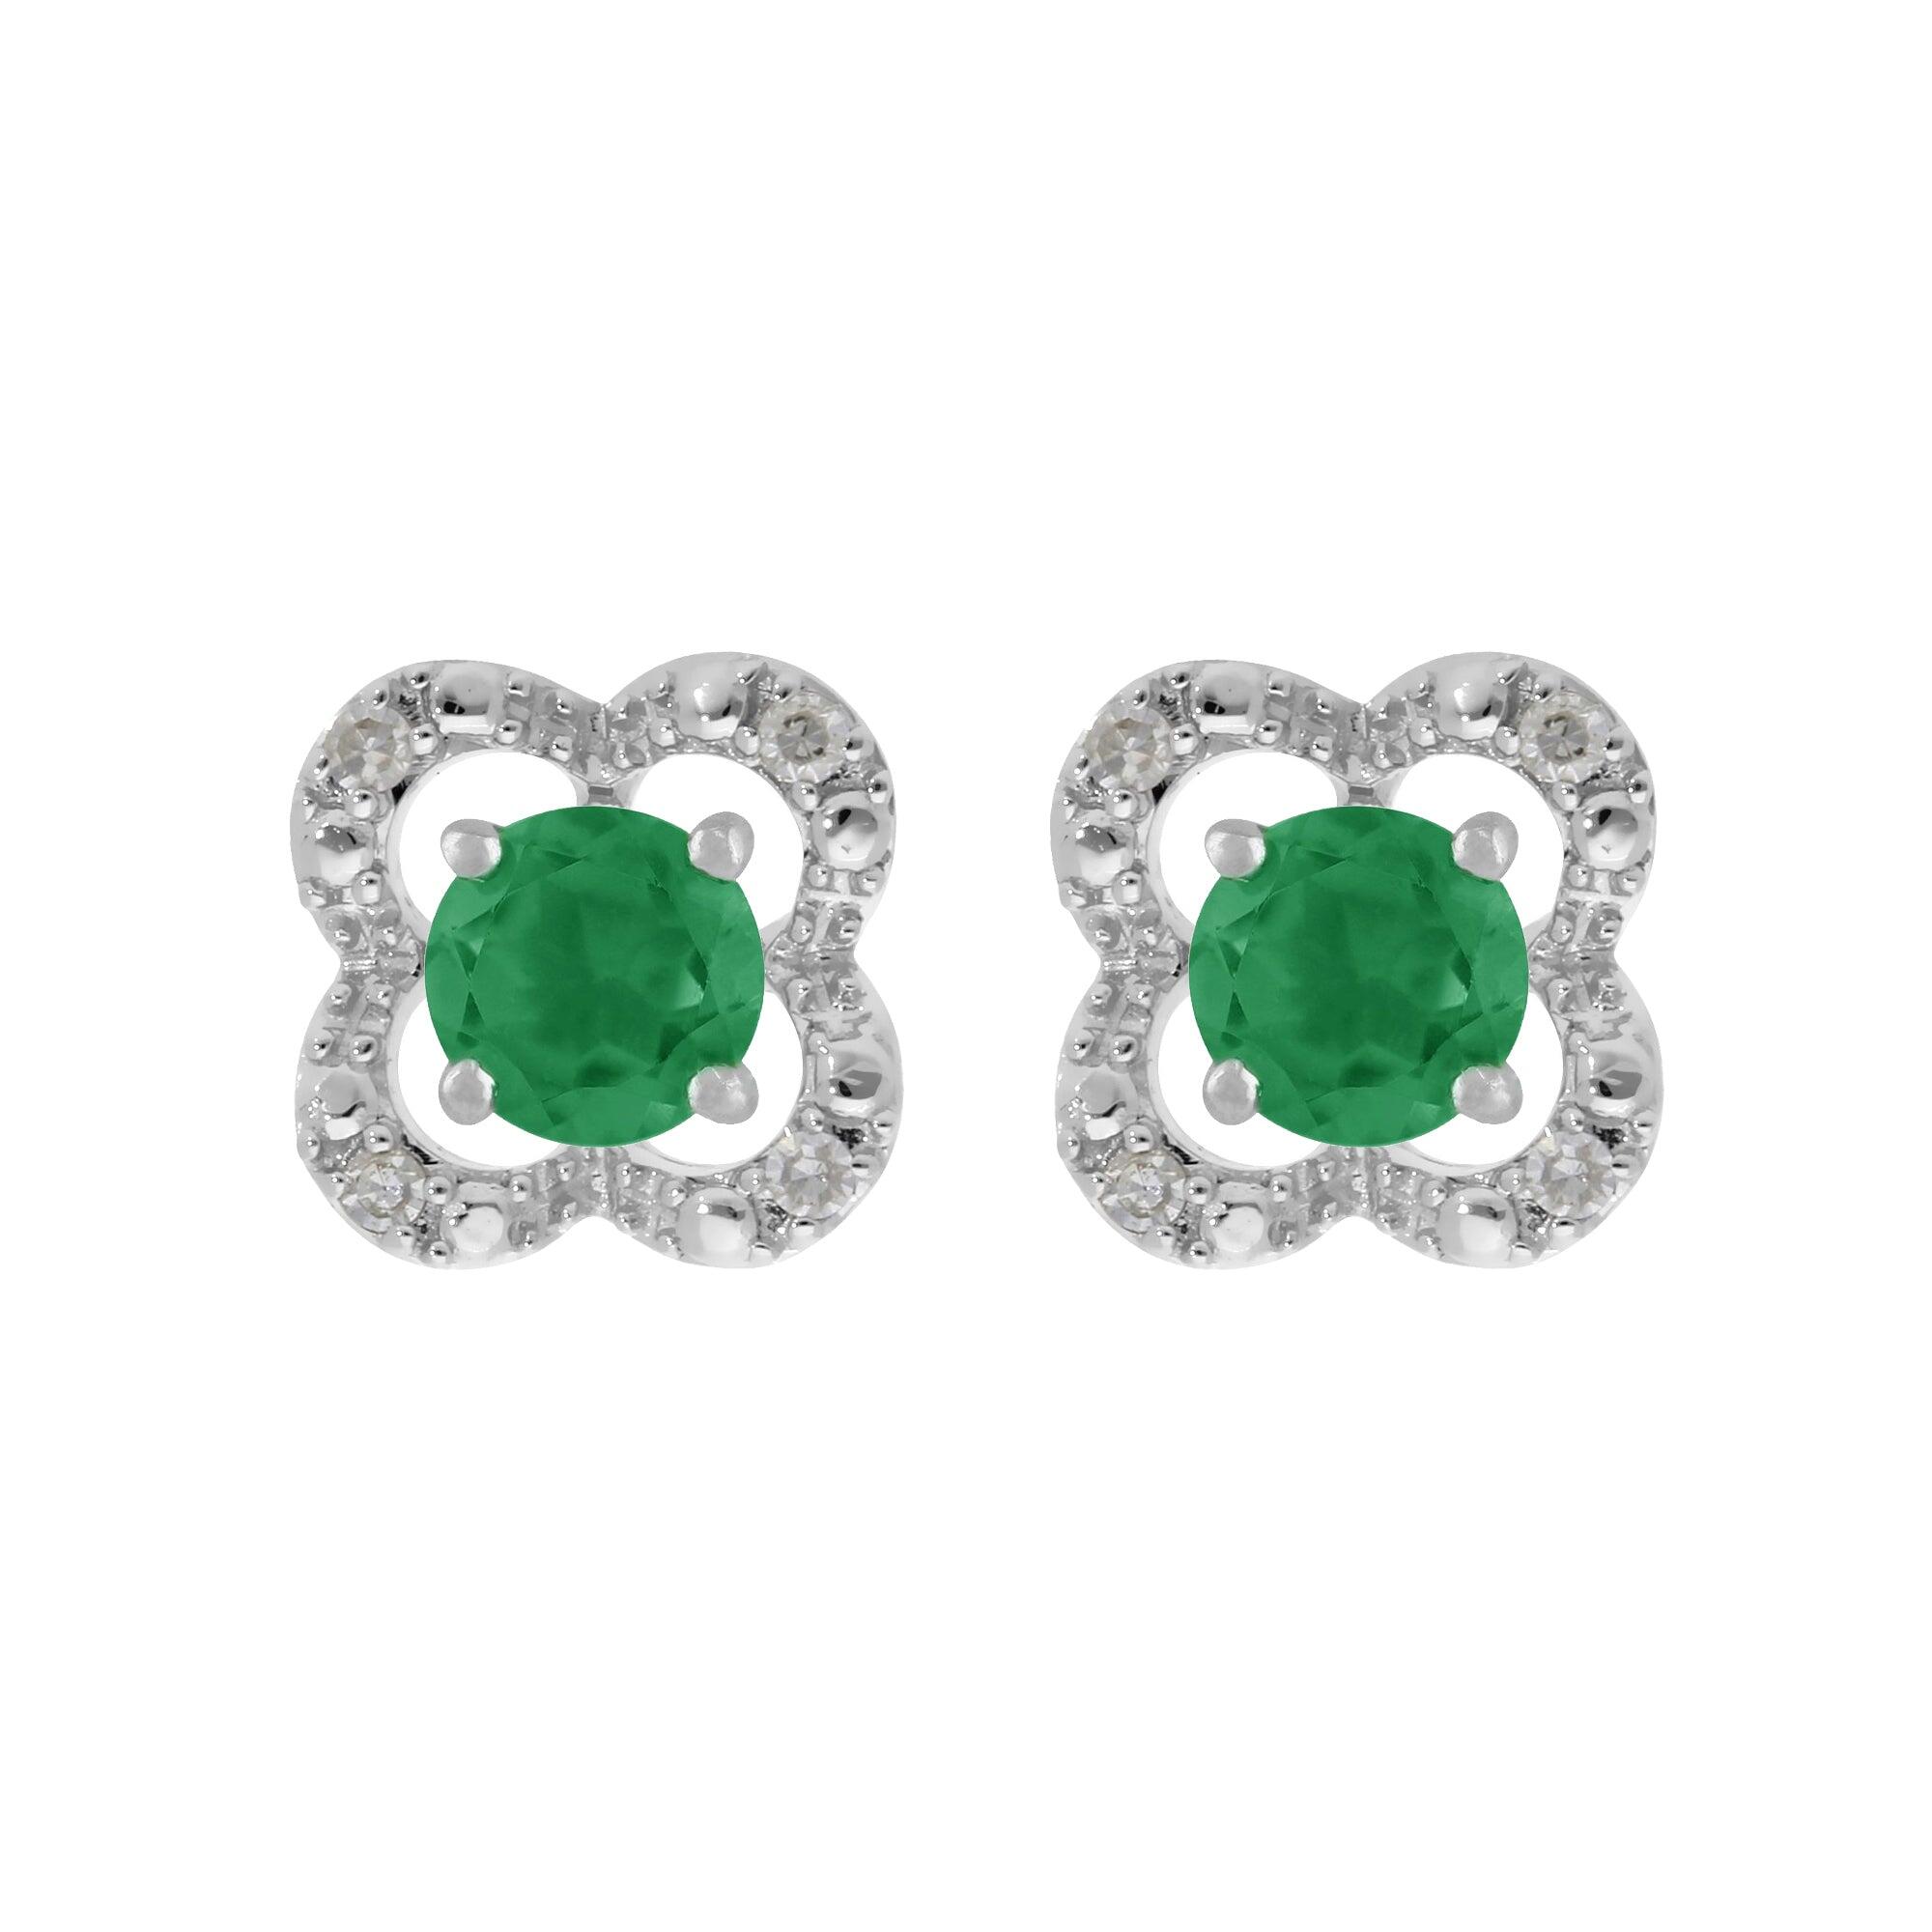 Classic Round Emerald Stud Earrings with Detachable Diamond Flower Ear Jacket in 9ct White Gold